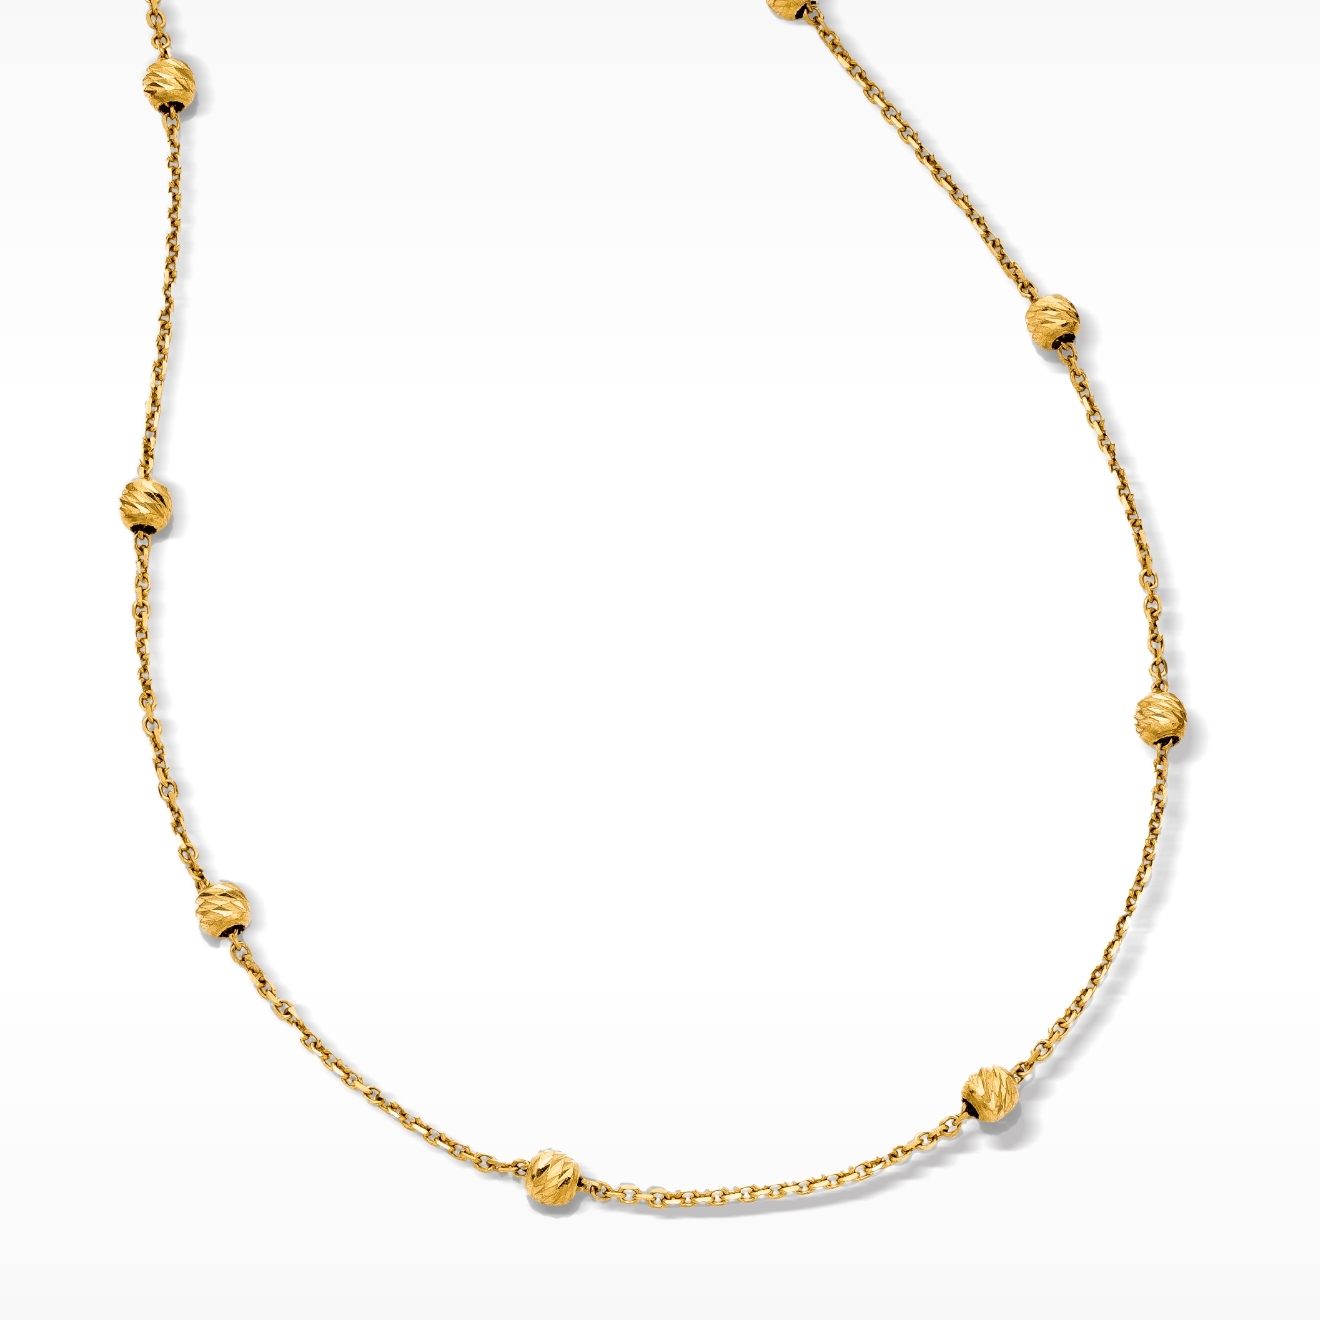 Shop by Category - 10-18K Gold Necklaces